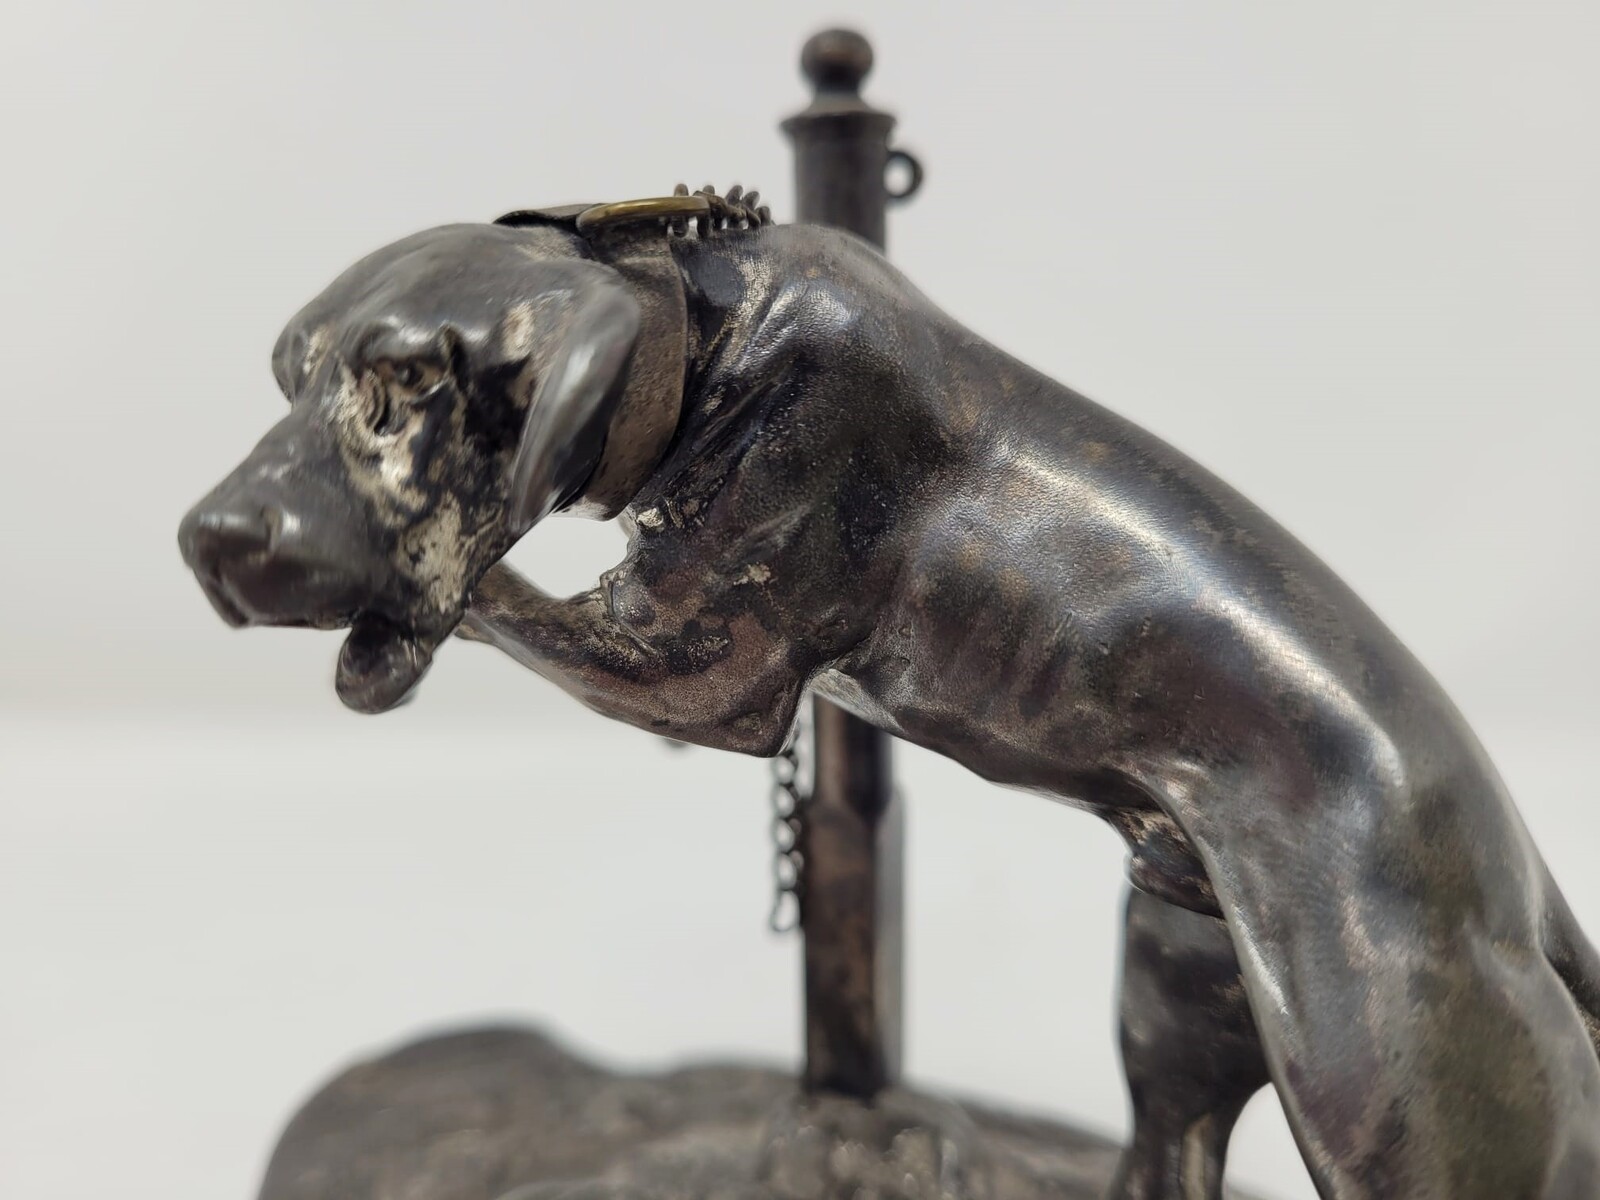 Silver metal sculpture representing a tethered dog